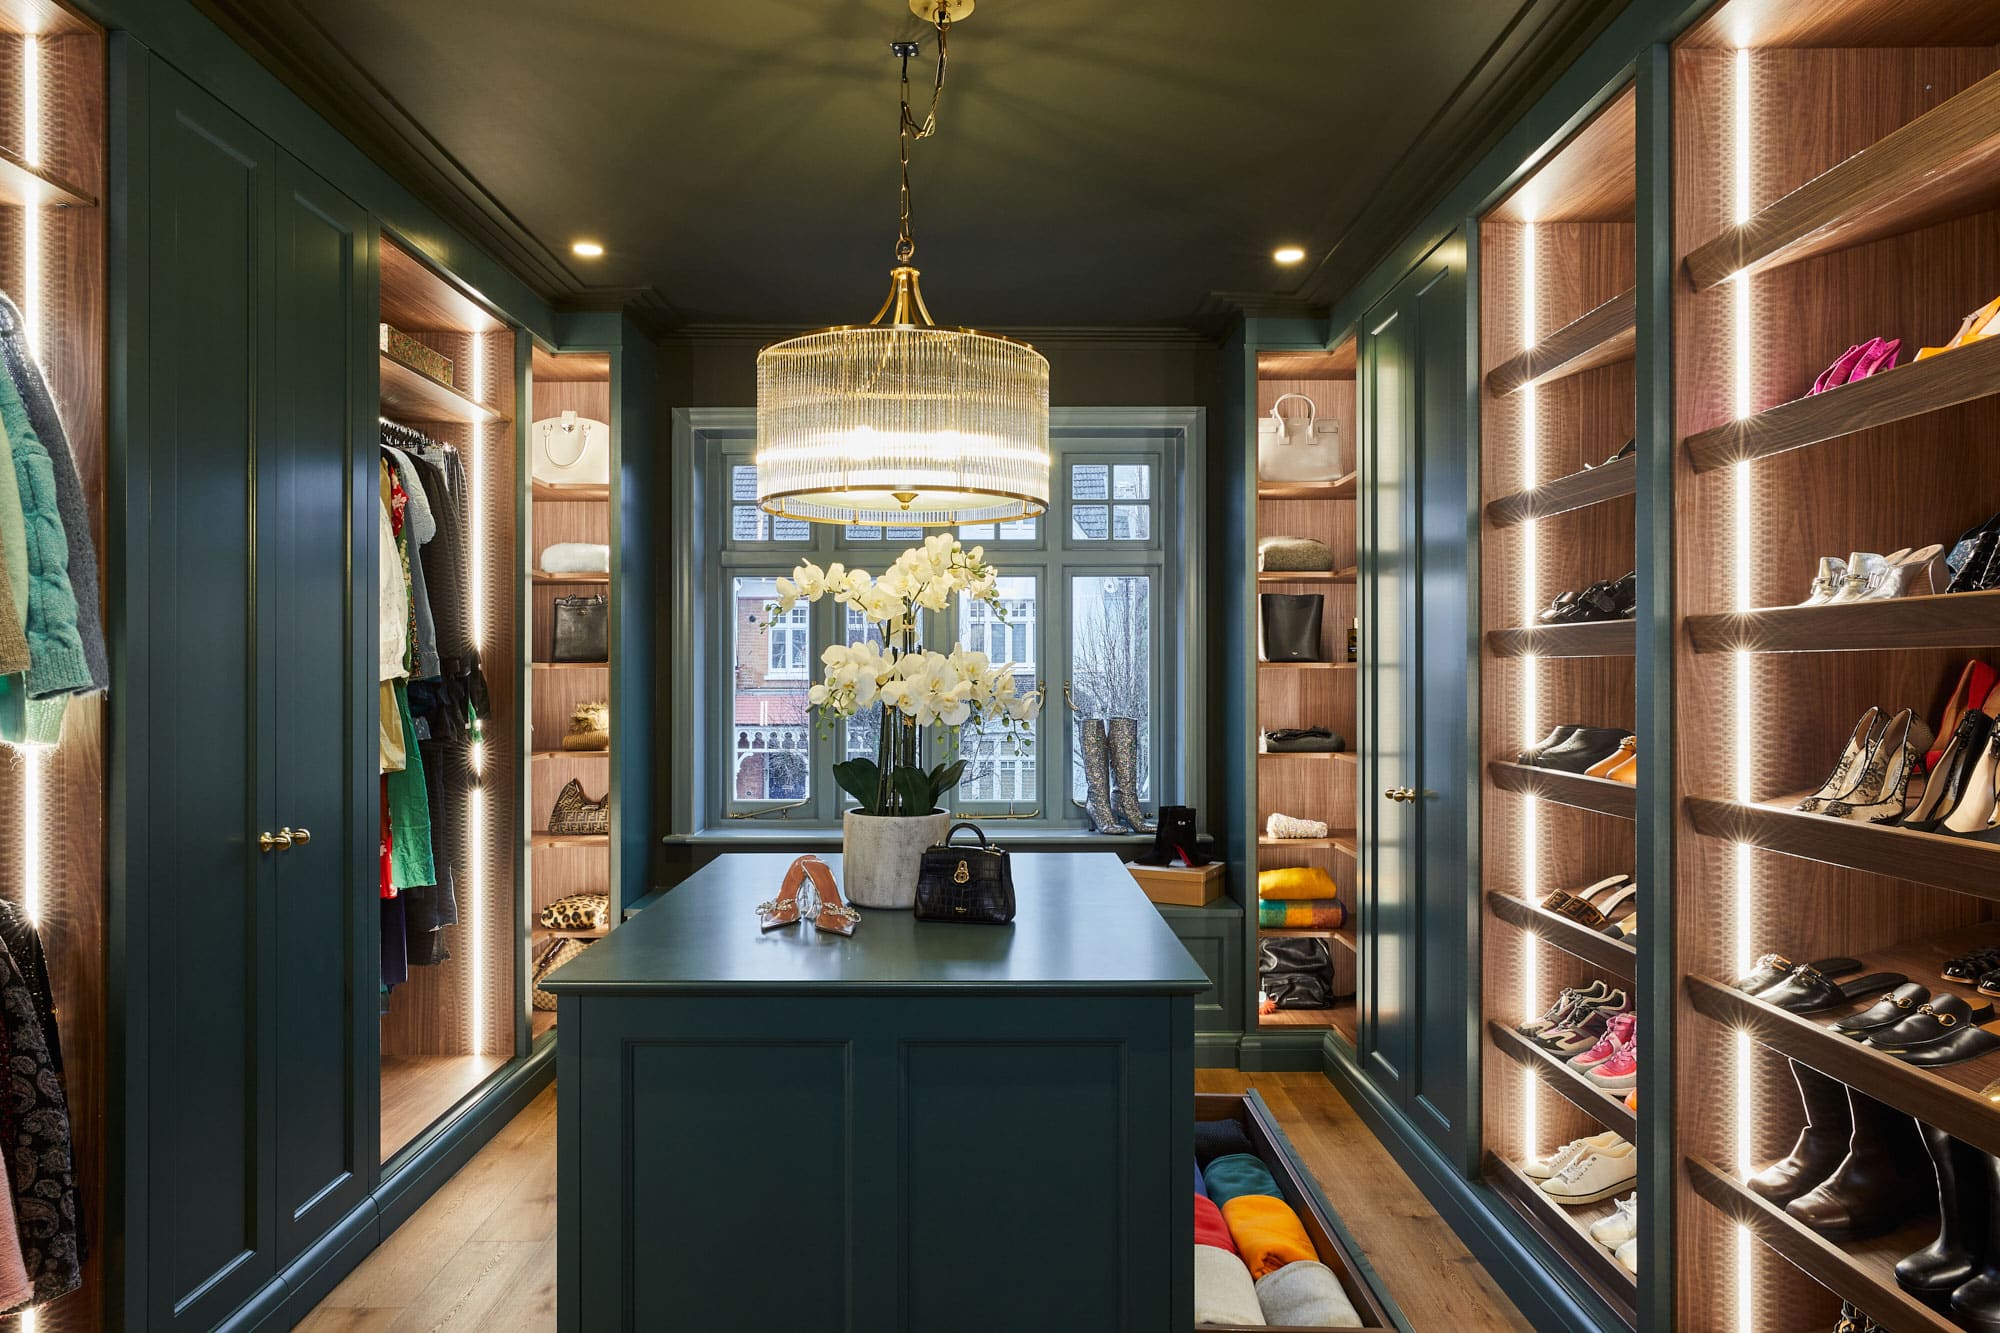 An luxurious room with a spacious walk-in closet